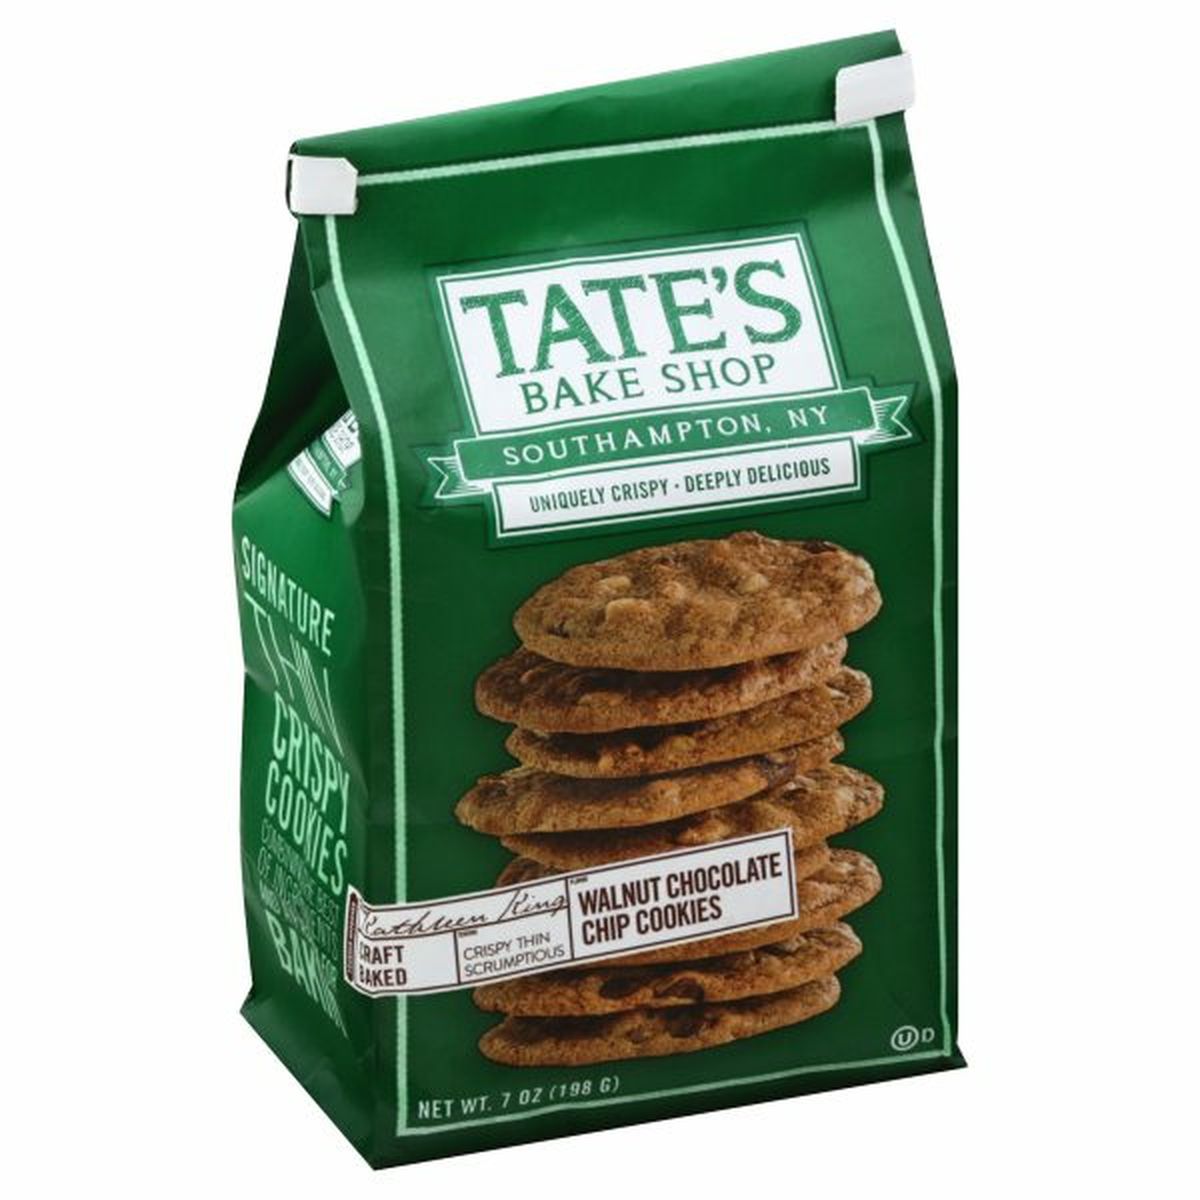 Calories in Tate's Bake Shop Cookies, Walnut Chocolate Chip